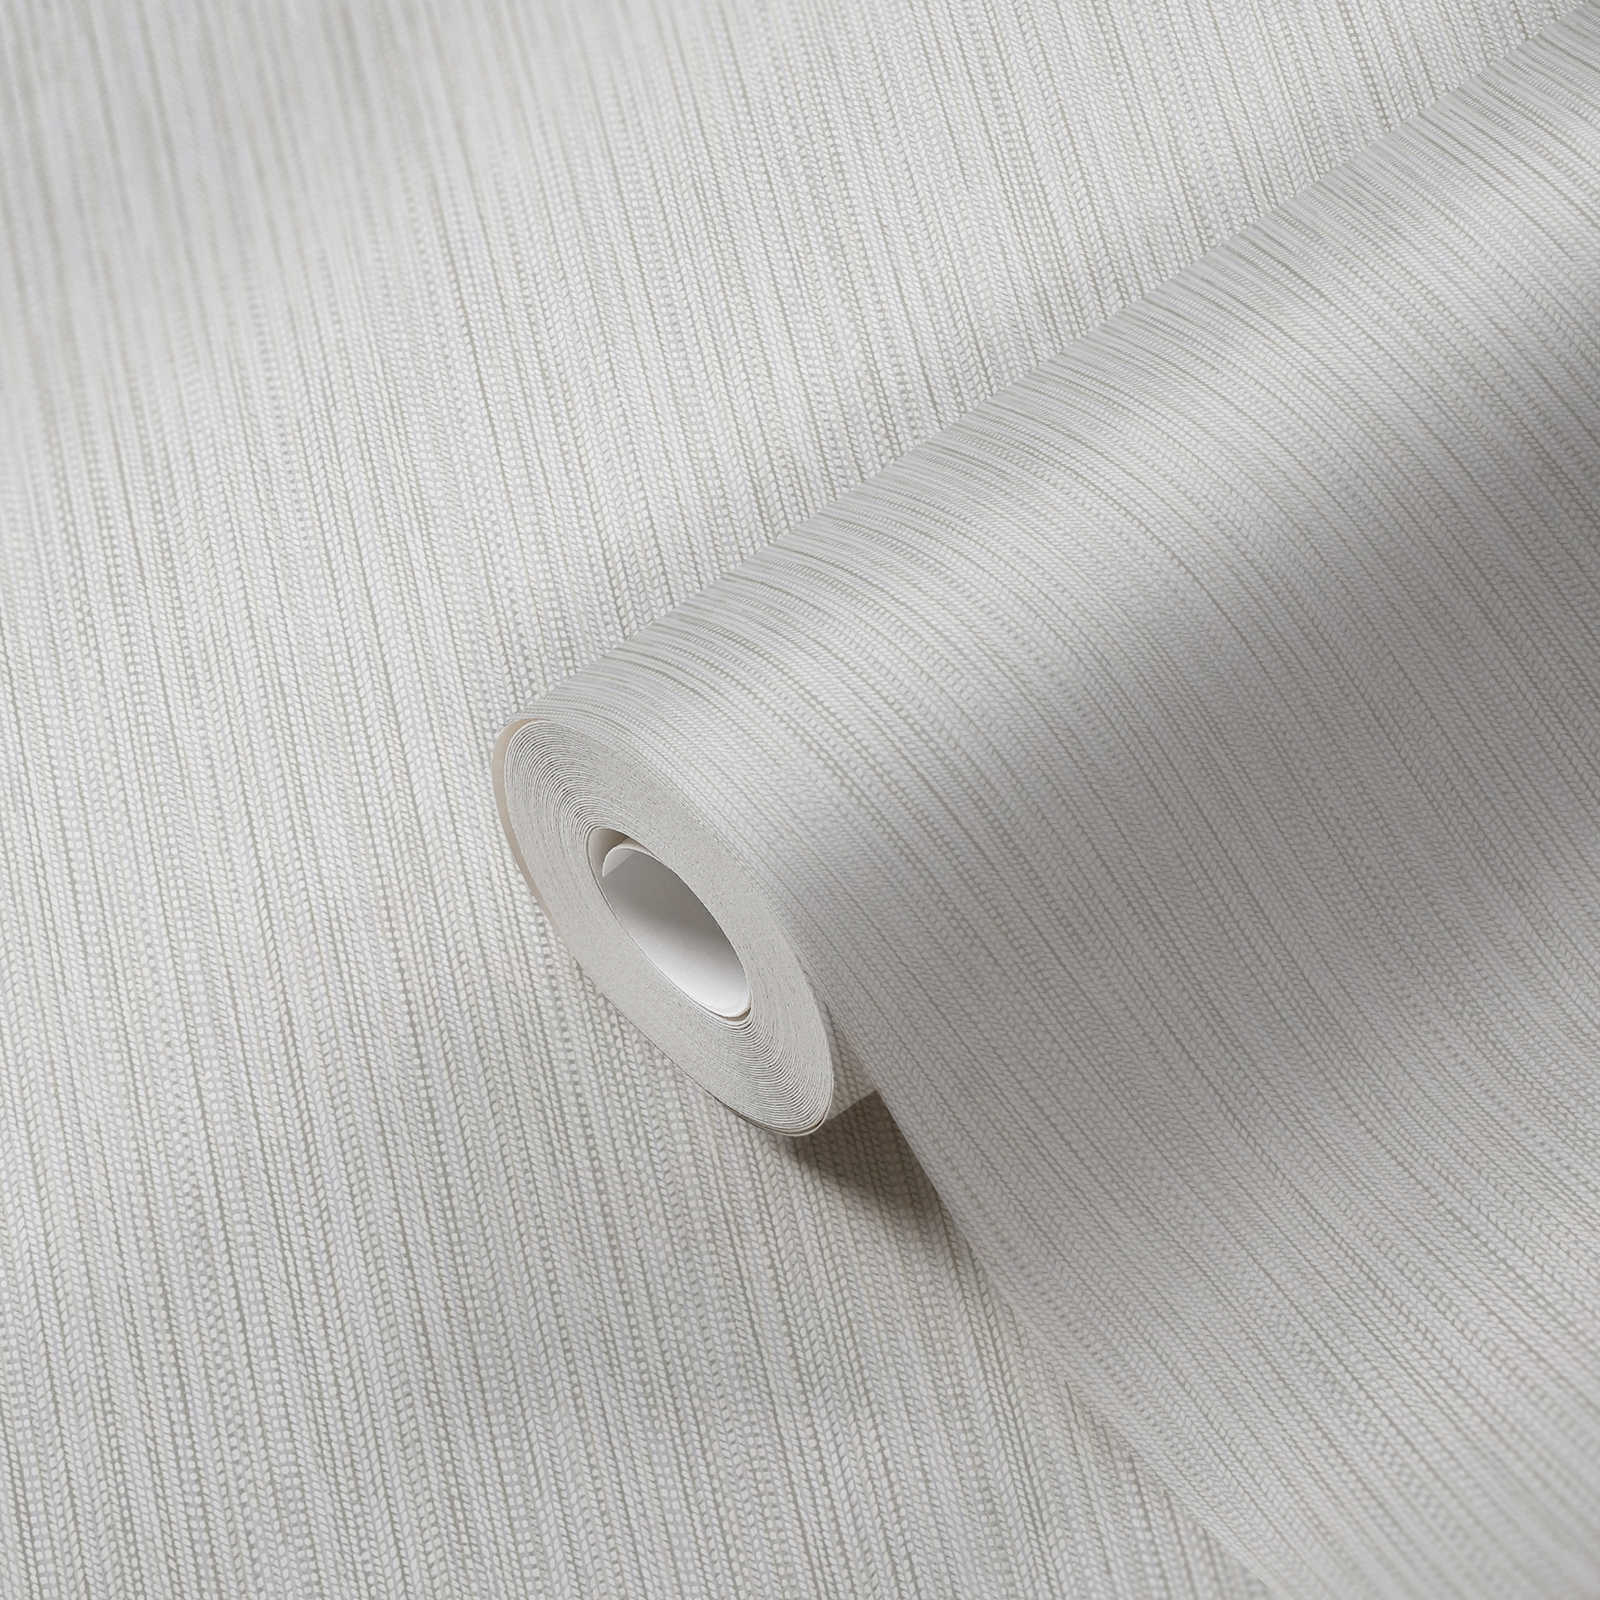             Non-woven wallpaper with plait fabric structure - white, light grey
        